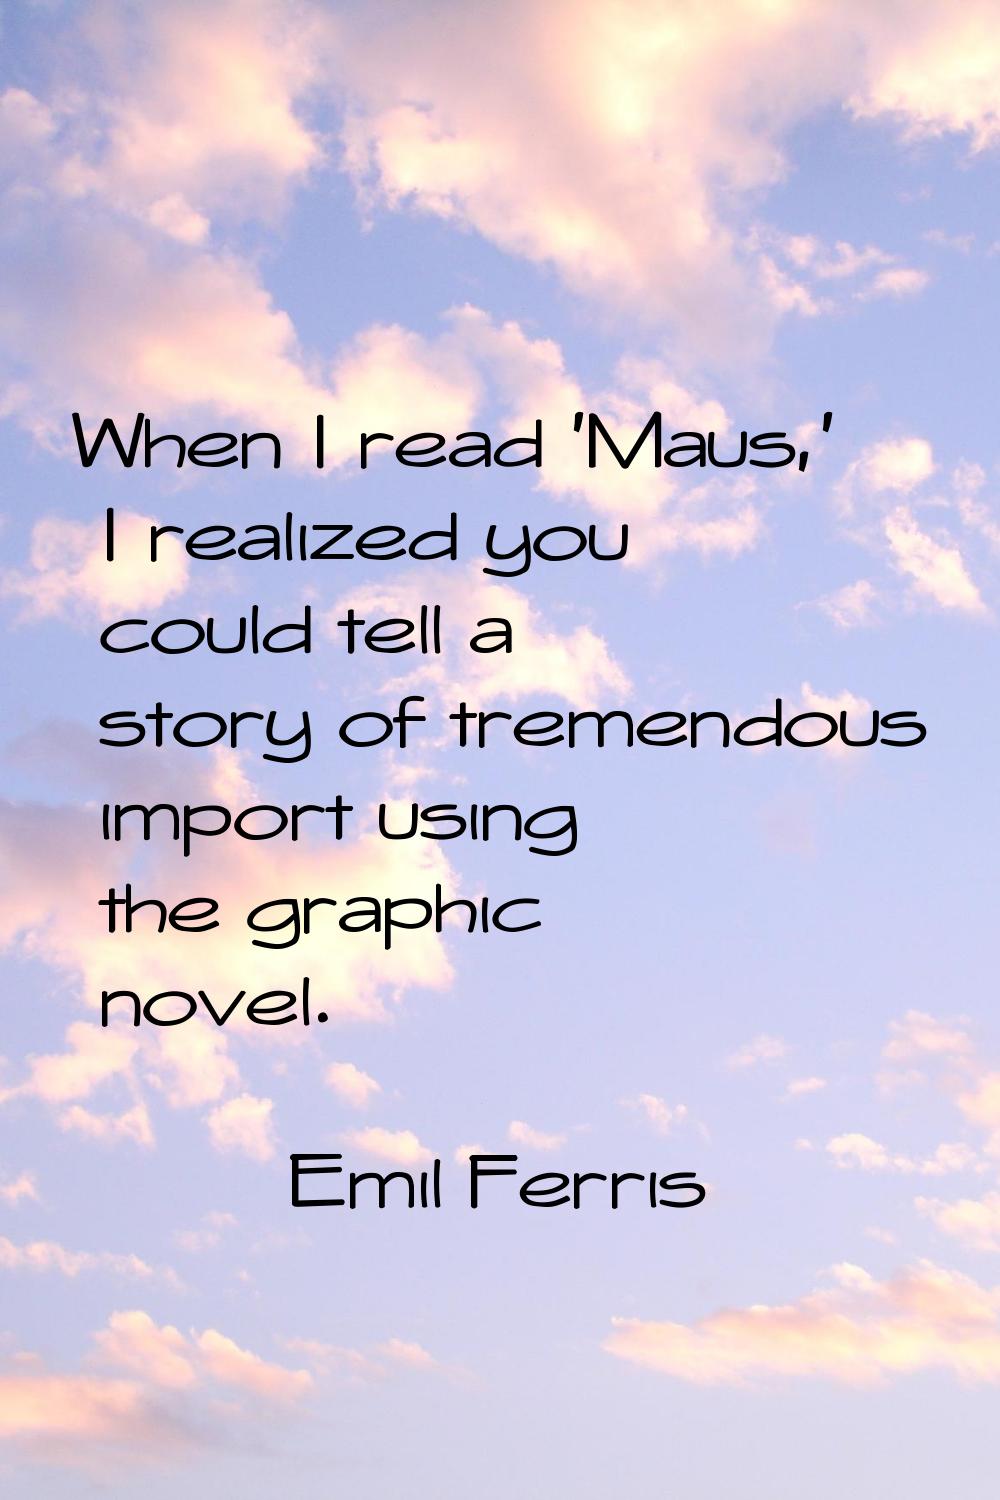 When I read 'Maus,' I realized you could tell a story of tremendous import using the graphic novel.